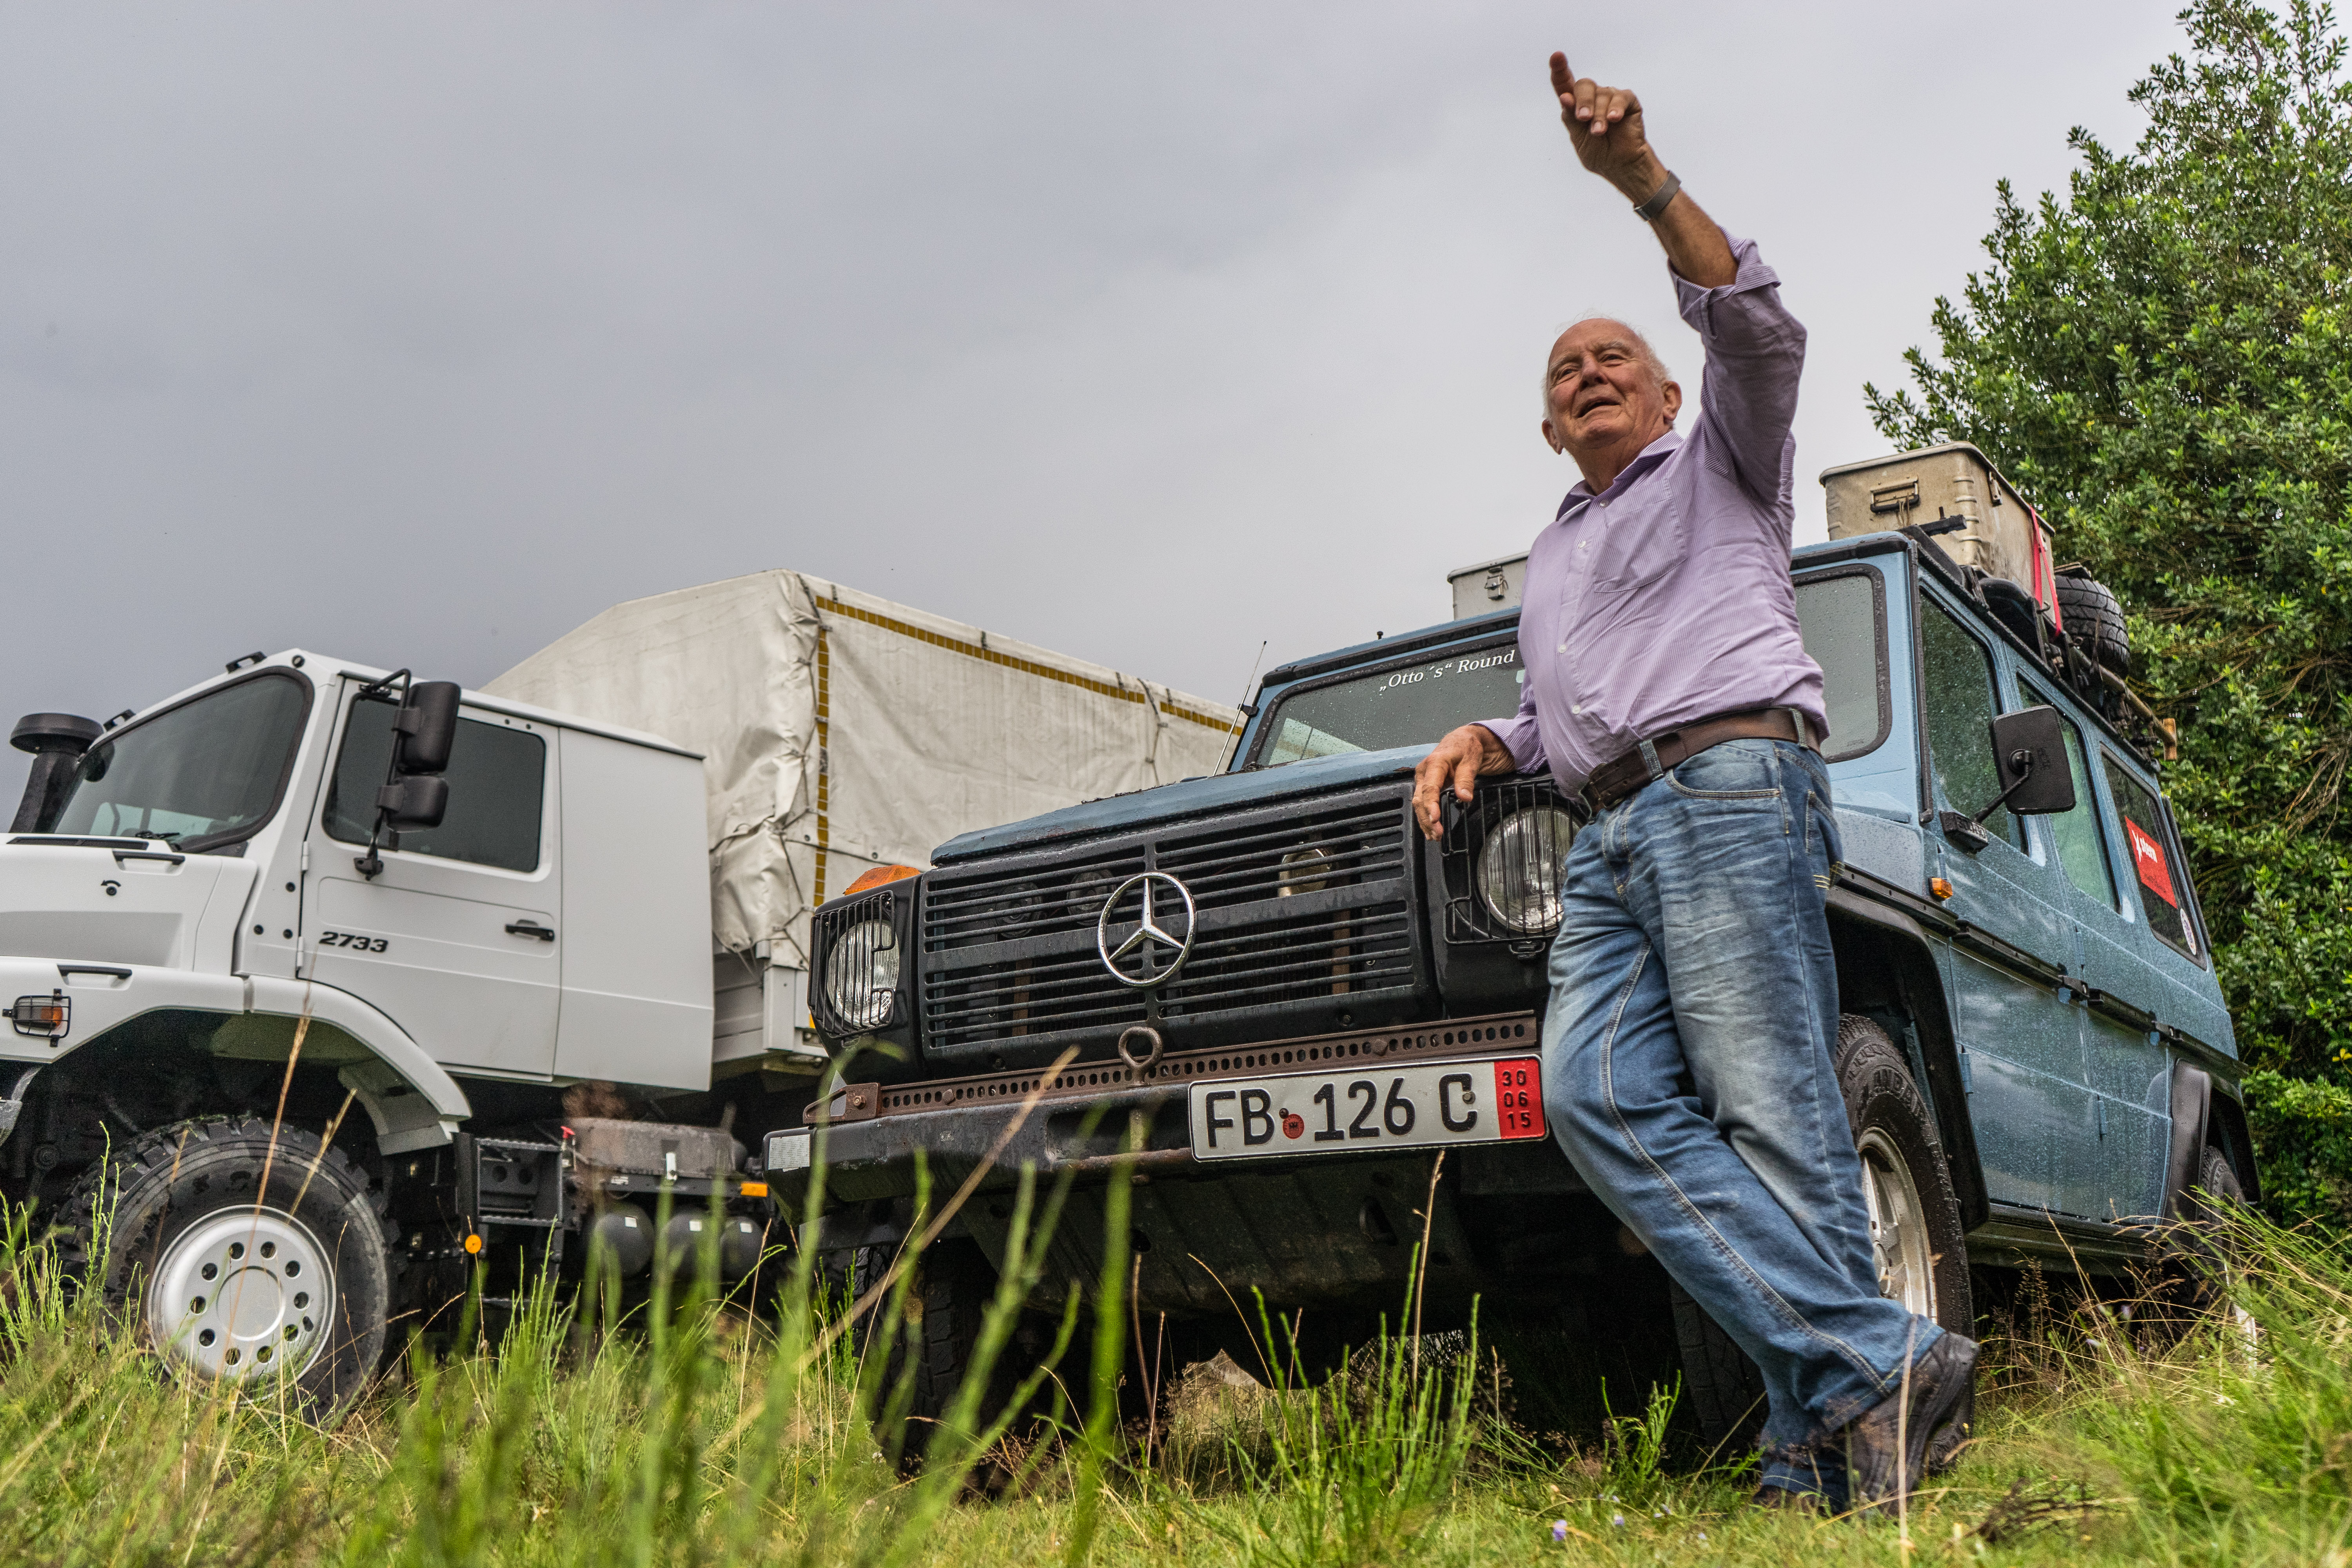 German traveler Gunther Holtorf has driven just about 900,000 km in 26 years in the same trusty 1988 Mercedes-Benz 300GD G-wagen, which he named “Otto” because that’s what he’d call all his friends’ children. With his wife Christine (until her passing) Gunther's crossed the Amazon jungle through Guyana; been the only westerner to drive across North Korea (under strict escort); across Russia twice; and discovered that India was “the world’s biggest open-air museum”. A third of the odometer was done on unsurfaced roads or tracks, and the entire around-the-world trip was self-funded, apart from service and technical support from Mercedes and the occasional diplomatic interventions! Photo: Apoorva Prasad/ The Outdoor Journal